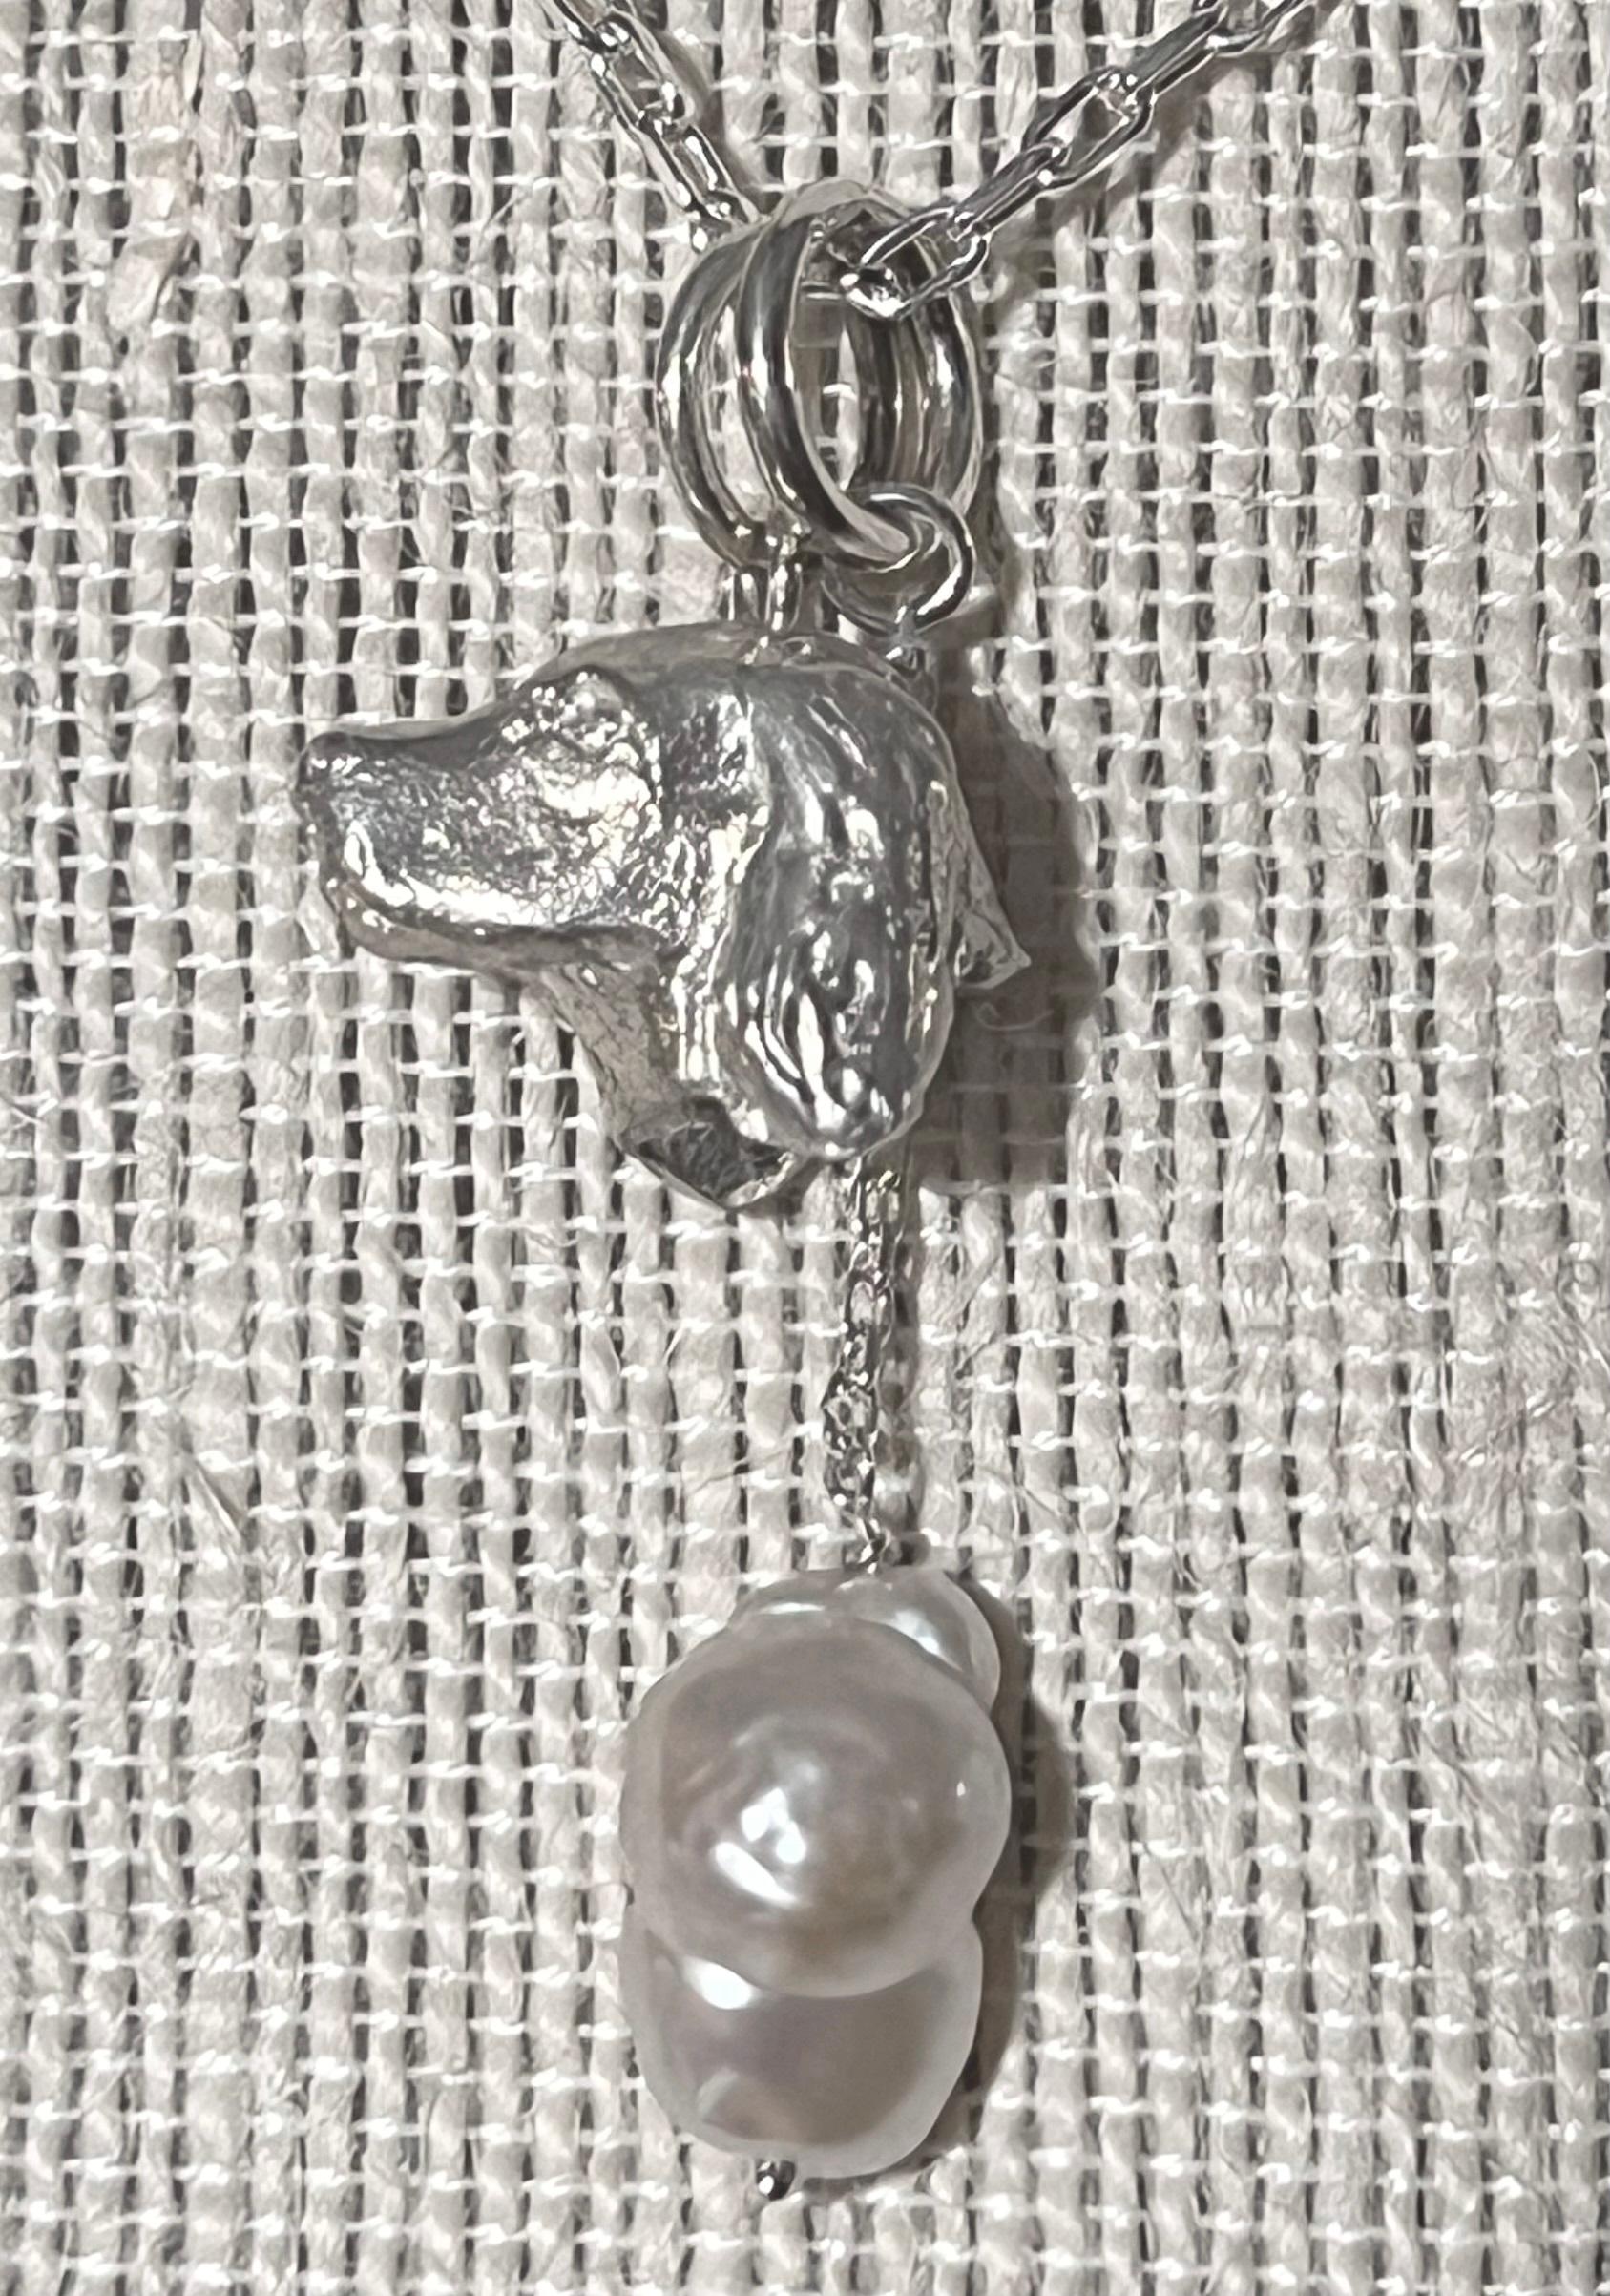      Miniature wildlife artist, Paul Eaton from England, hand sculpted a sterling silver Spaniel dog head pendant which is elegantly framed with one or two drop freshwater pearls.    The bespoke Spaniel dog sculpture is made into jewelry you can